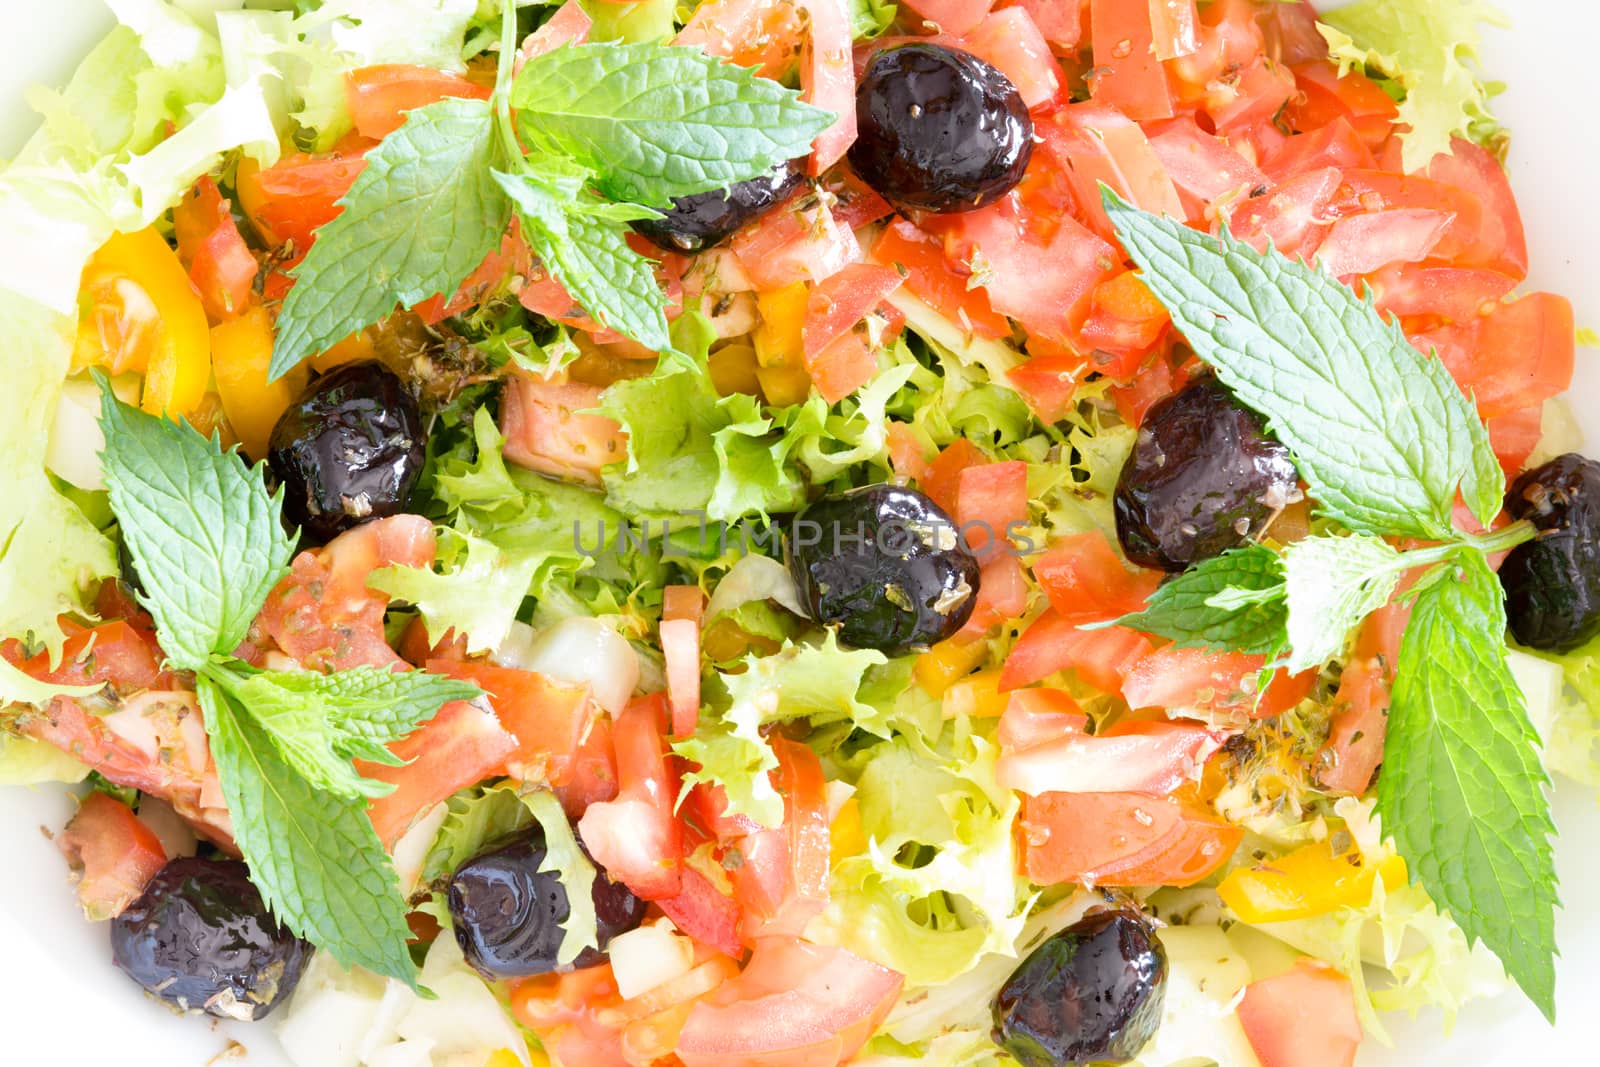 Fresh plain Mediterranean salad with olives by coskun